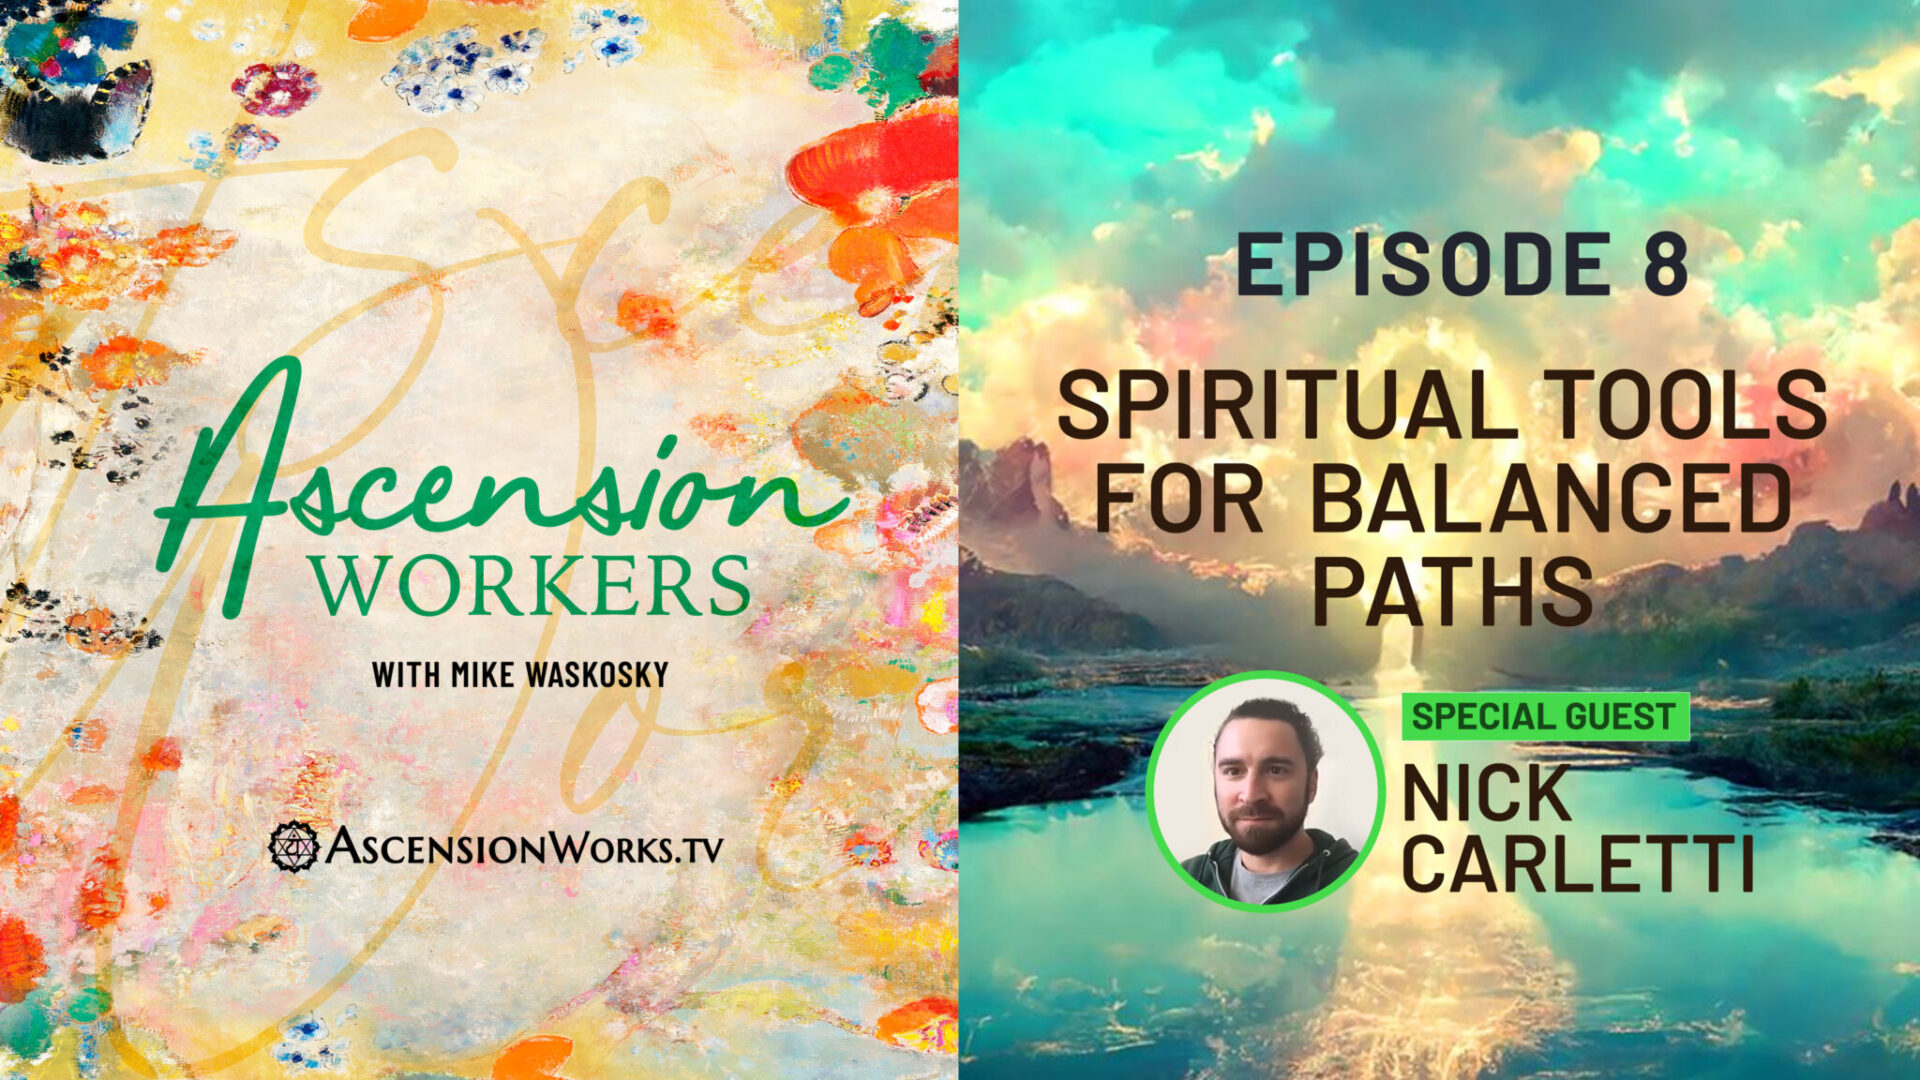 Ascension Workers Live Episode 008 Spiritual Tools for Balanced Paths with Nick